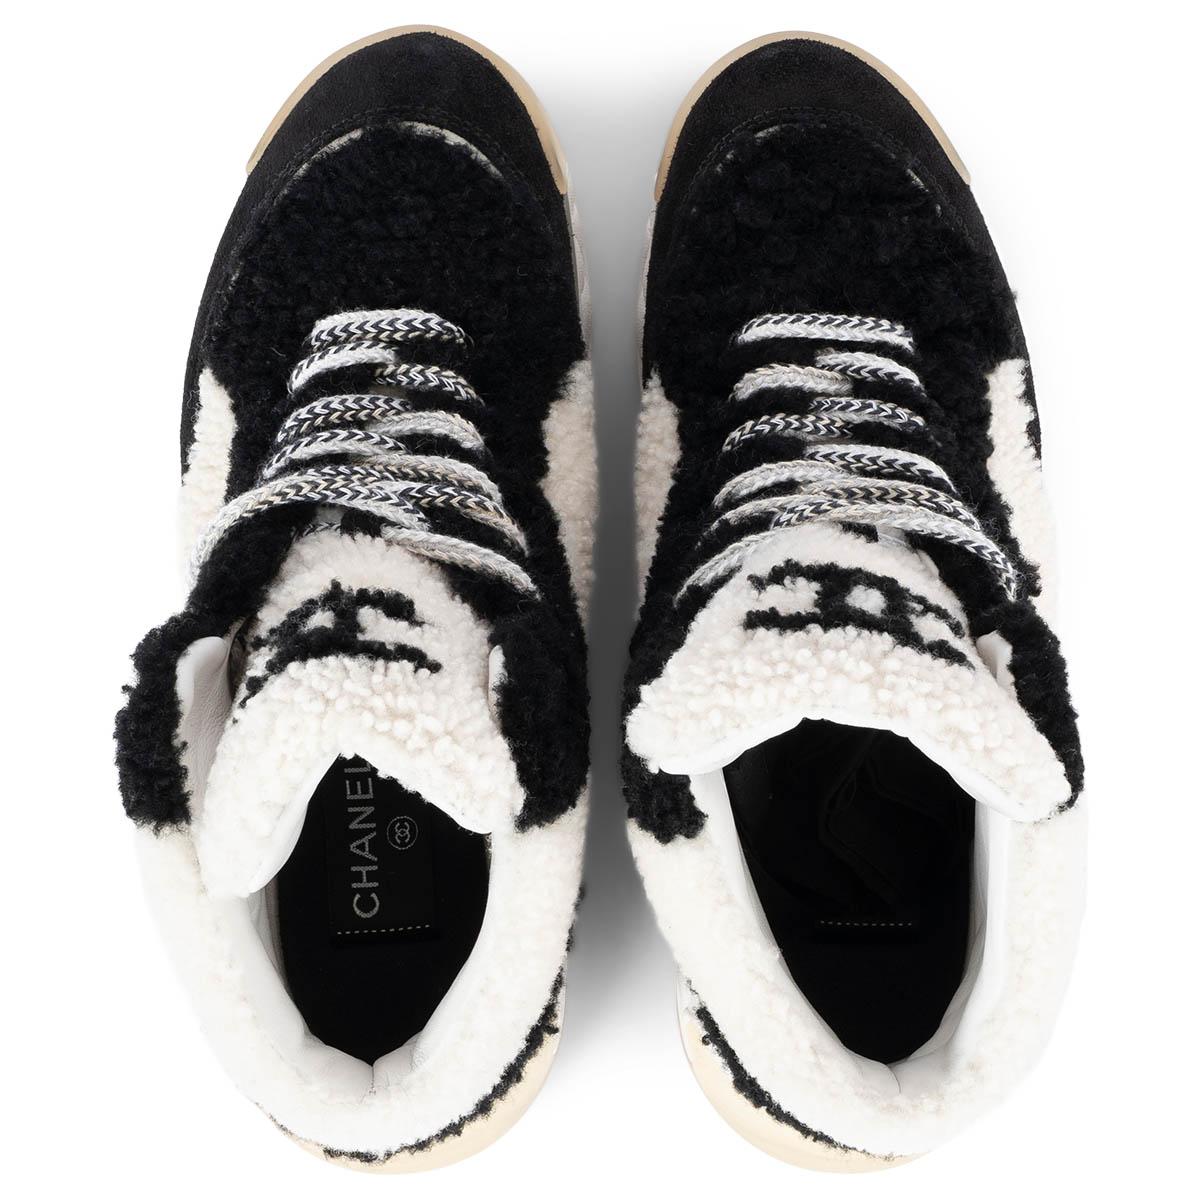 Women's CHANEL black & white 2019 19B SHEARLING Sneakers Shoes 37.5 For Sale